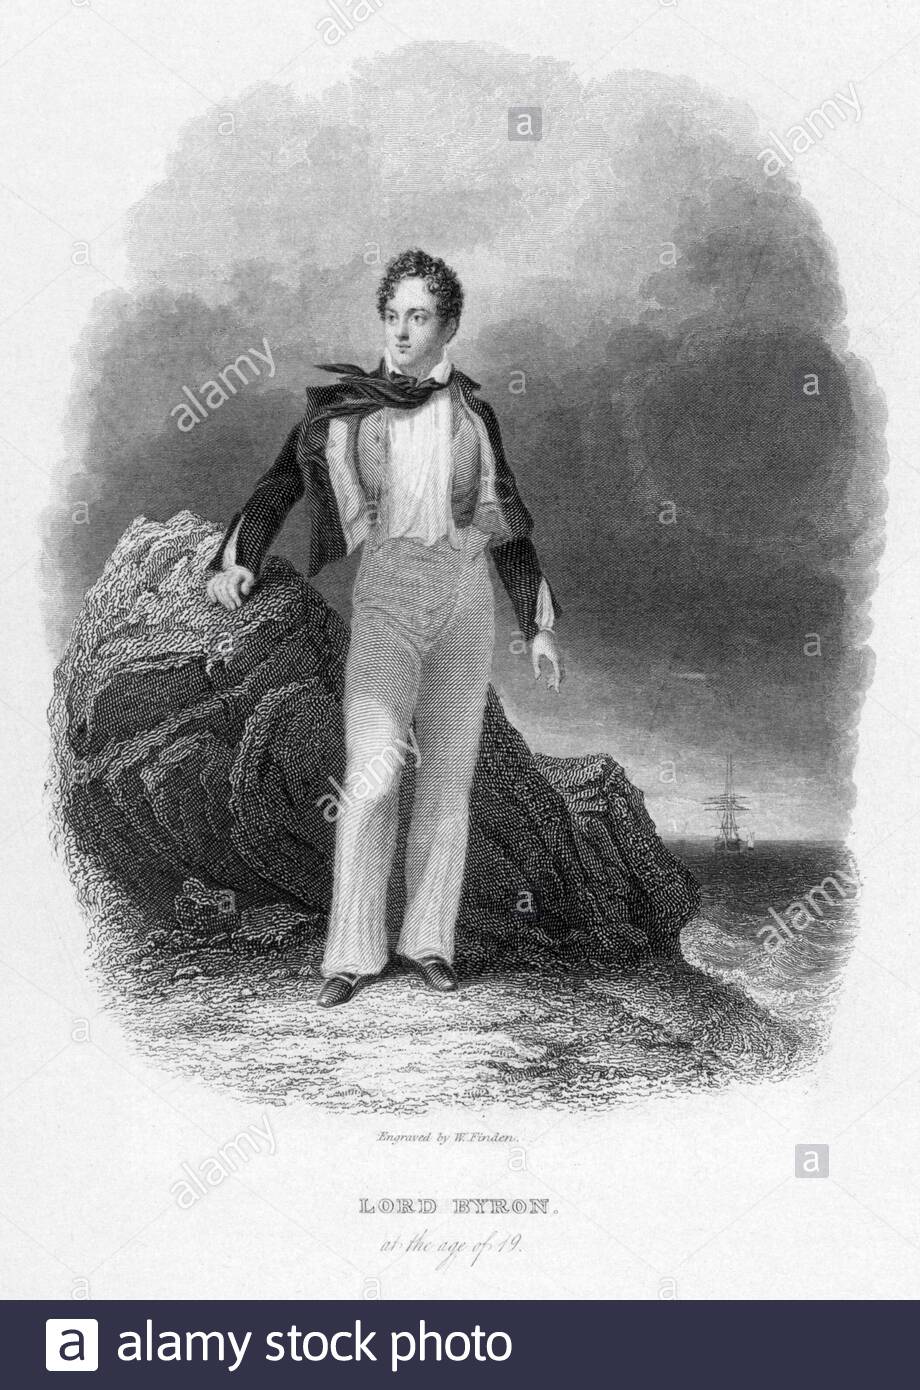 Lord Byron portrait, 1788 – 1824, was a British poet seen here at the age of 19, vintage illustration from 1832 Stock Photo